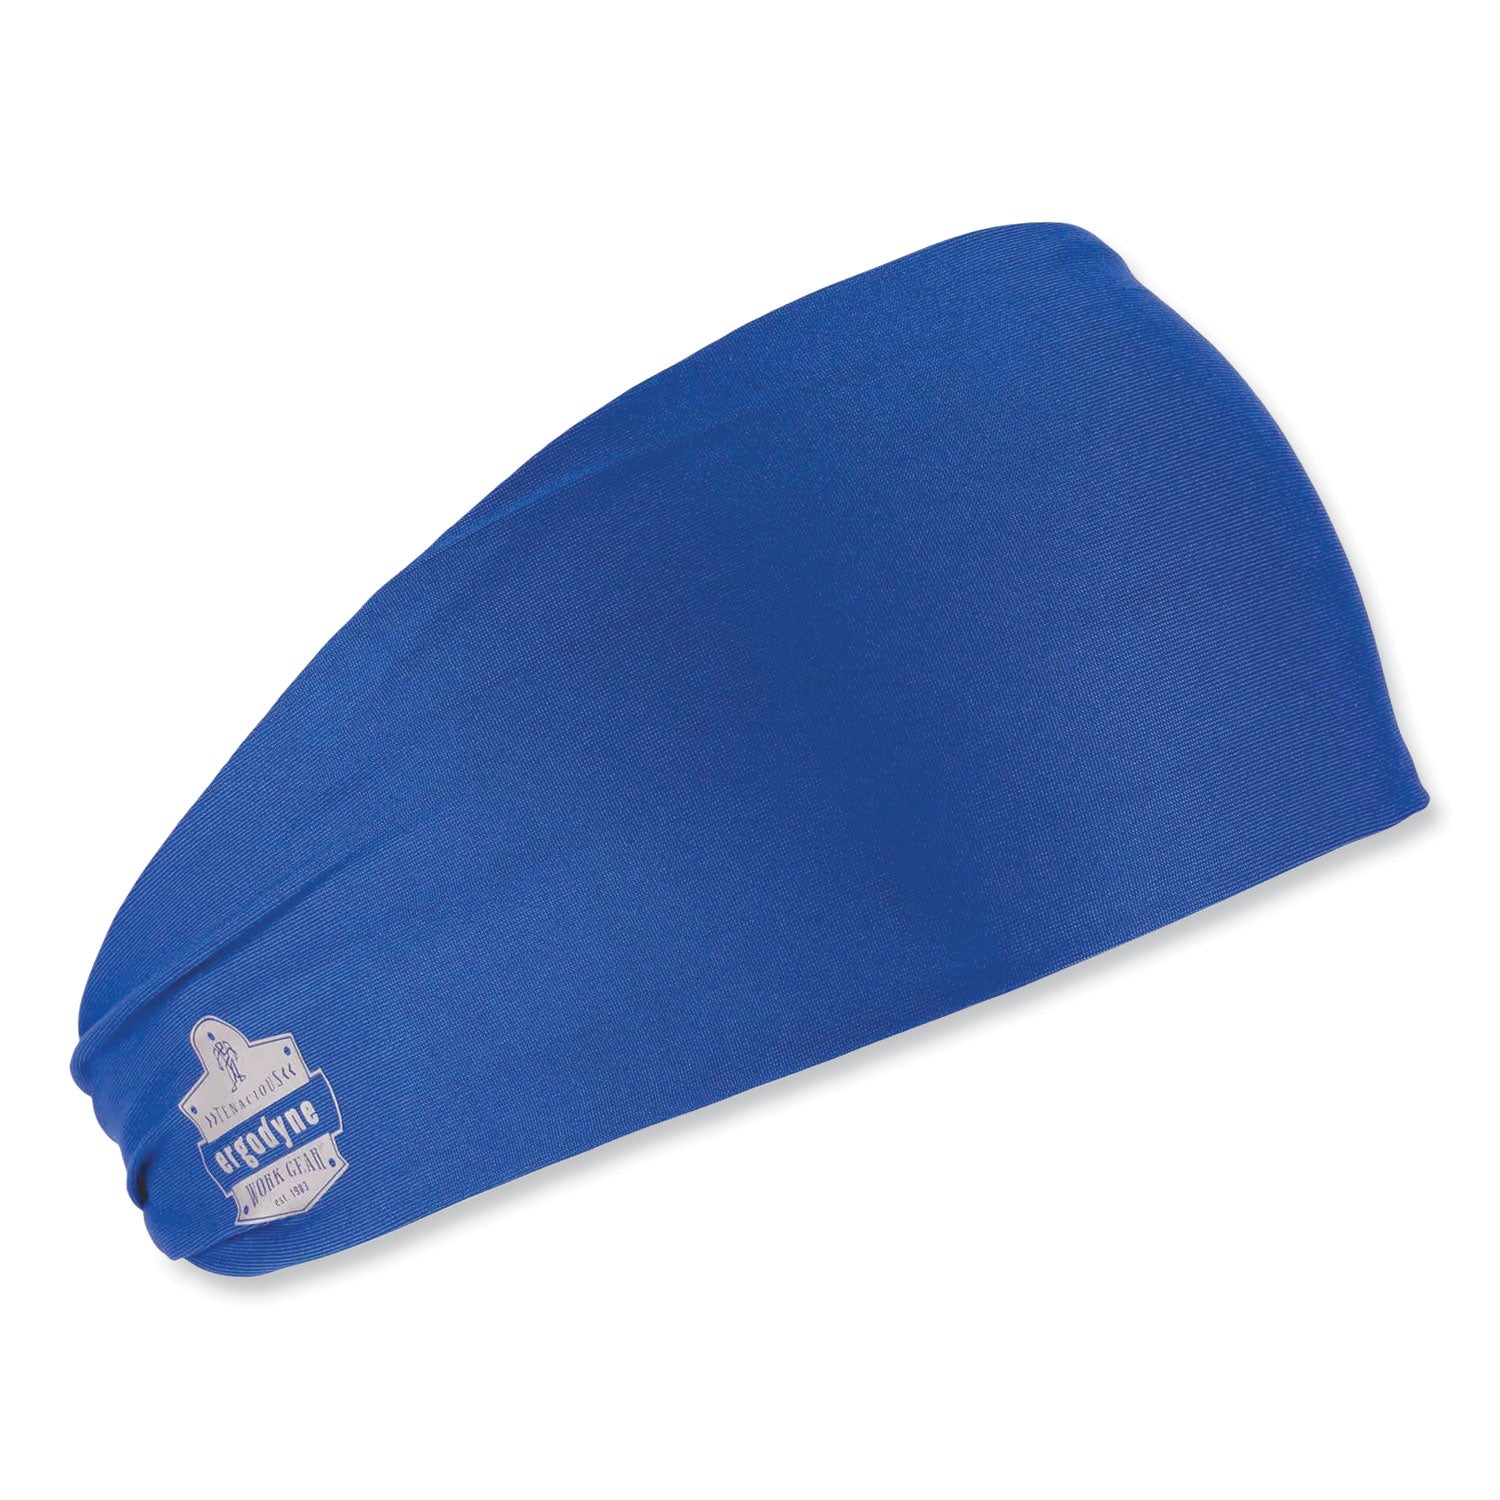 chill-its-6634-performance-knit-cooling-headband-polyester-spandex-one-size-fits-most-blue-ships-in-1-3-business-days_ego12701 - 1